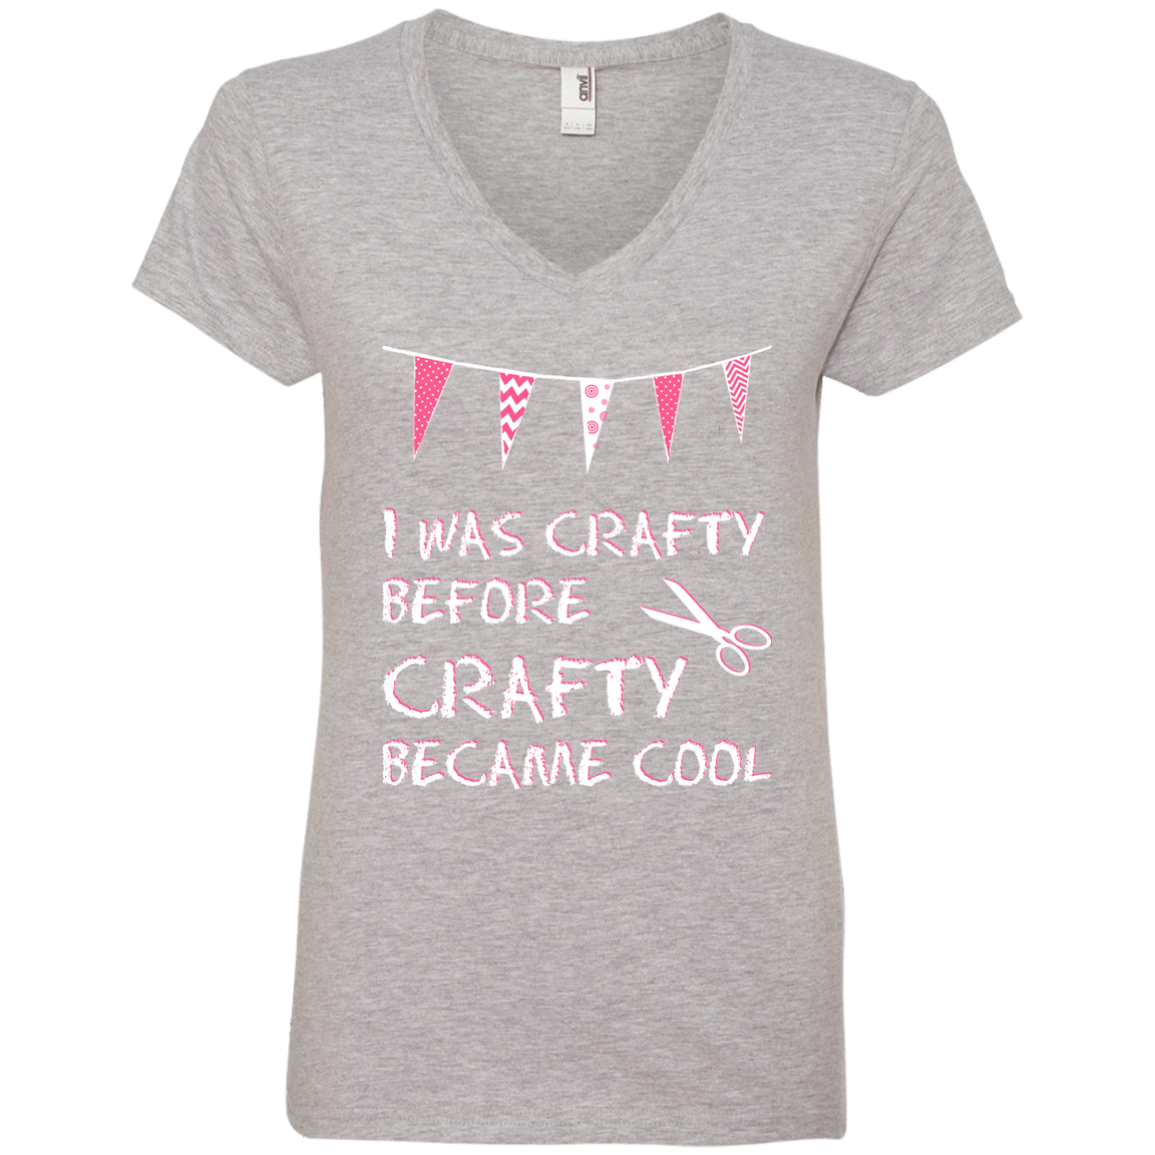 I Was Crafty Before Crafty Became Cool Ladies V-Neck T-Shirt